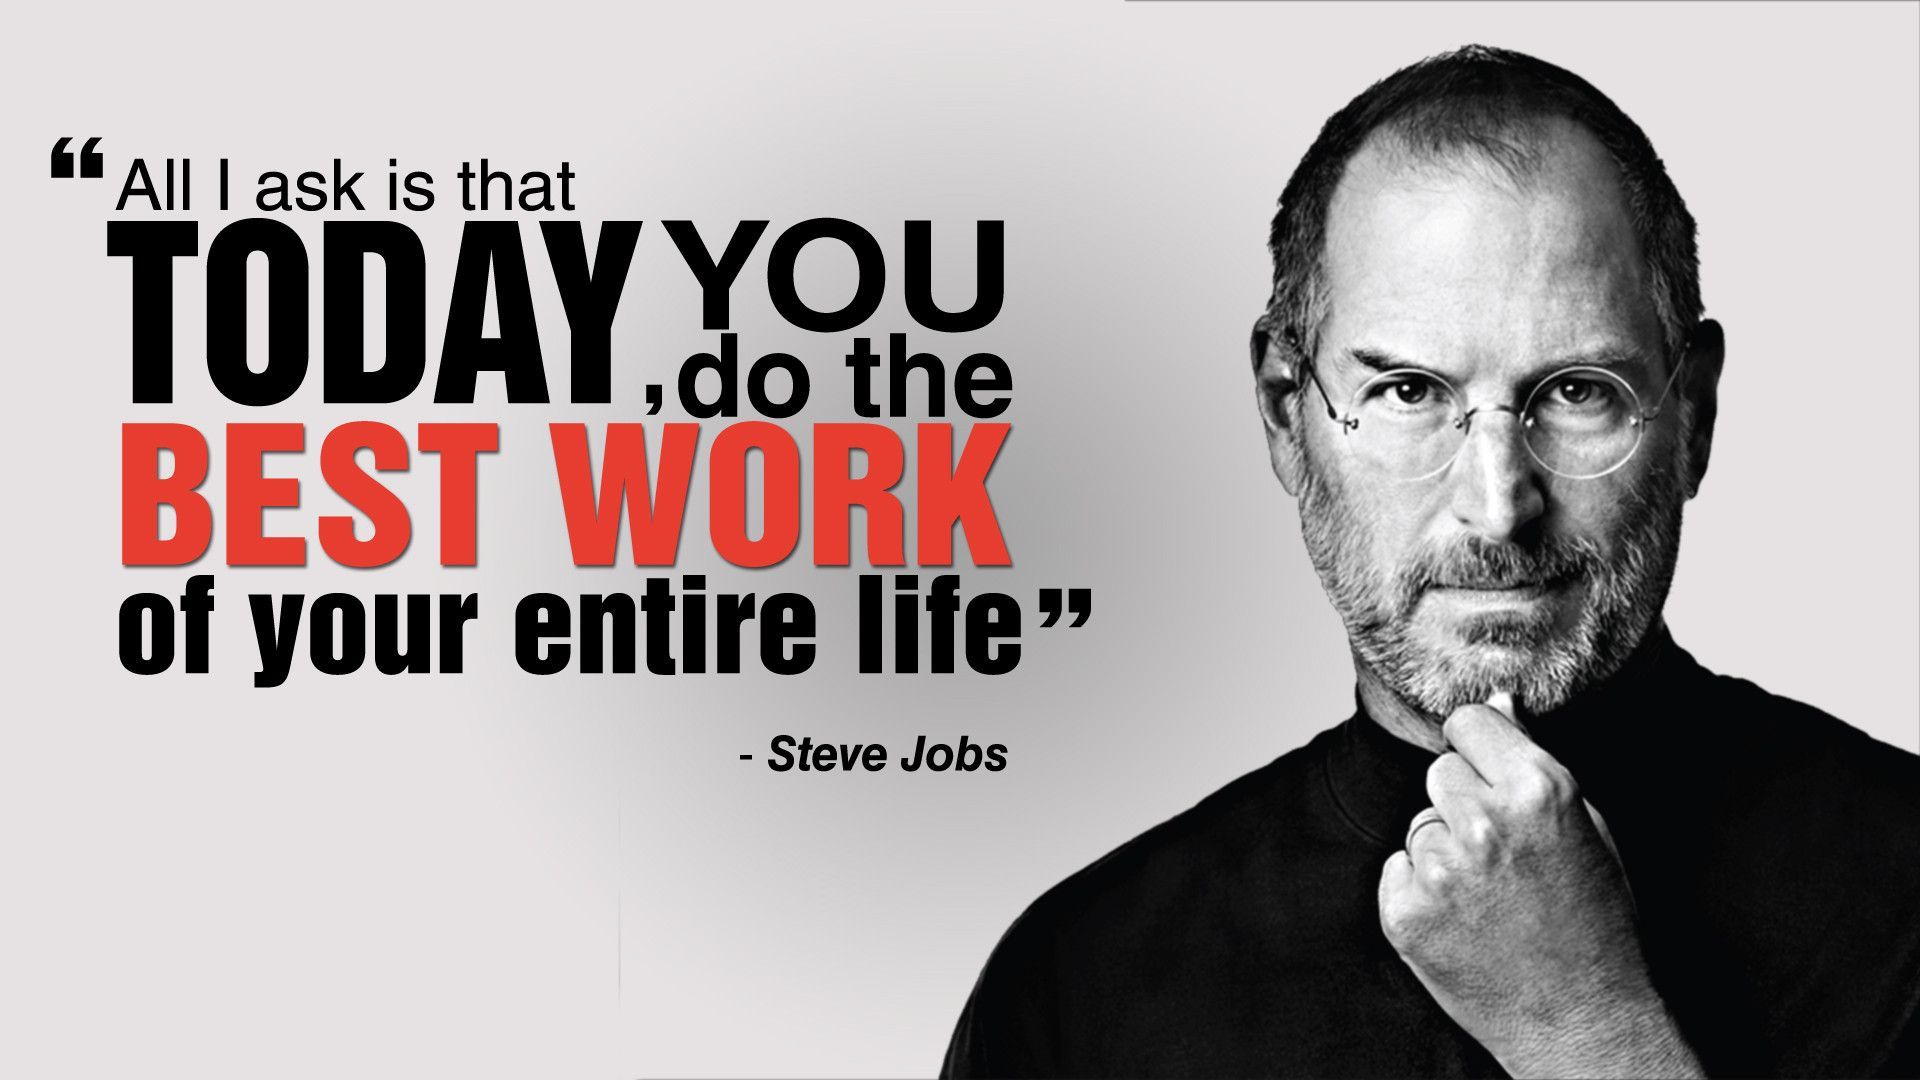 Steve jobs Quotes Wallpaper & Picture Free Download. Steve